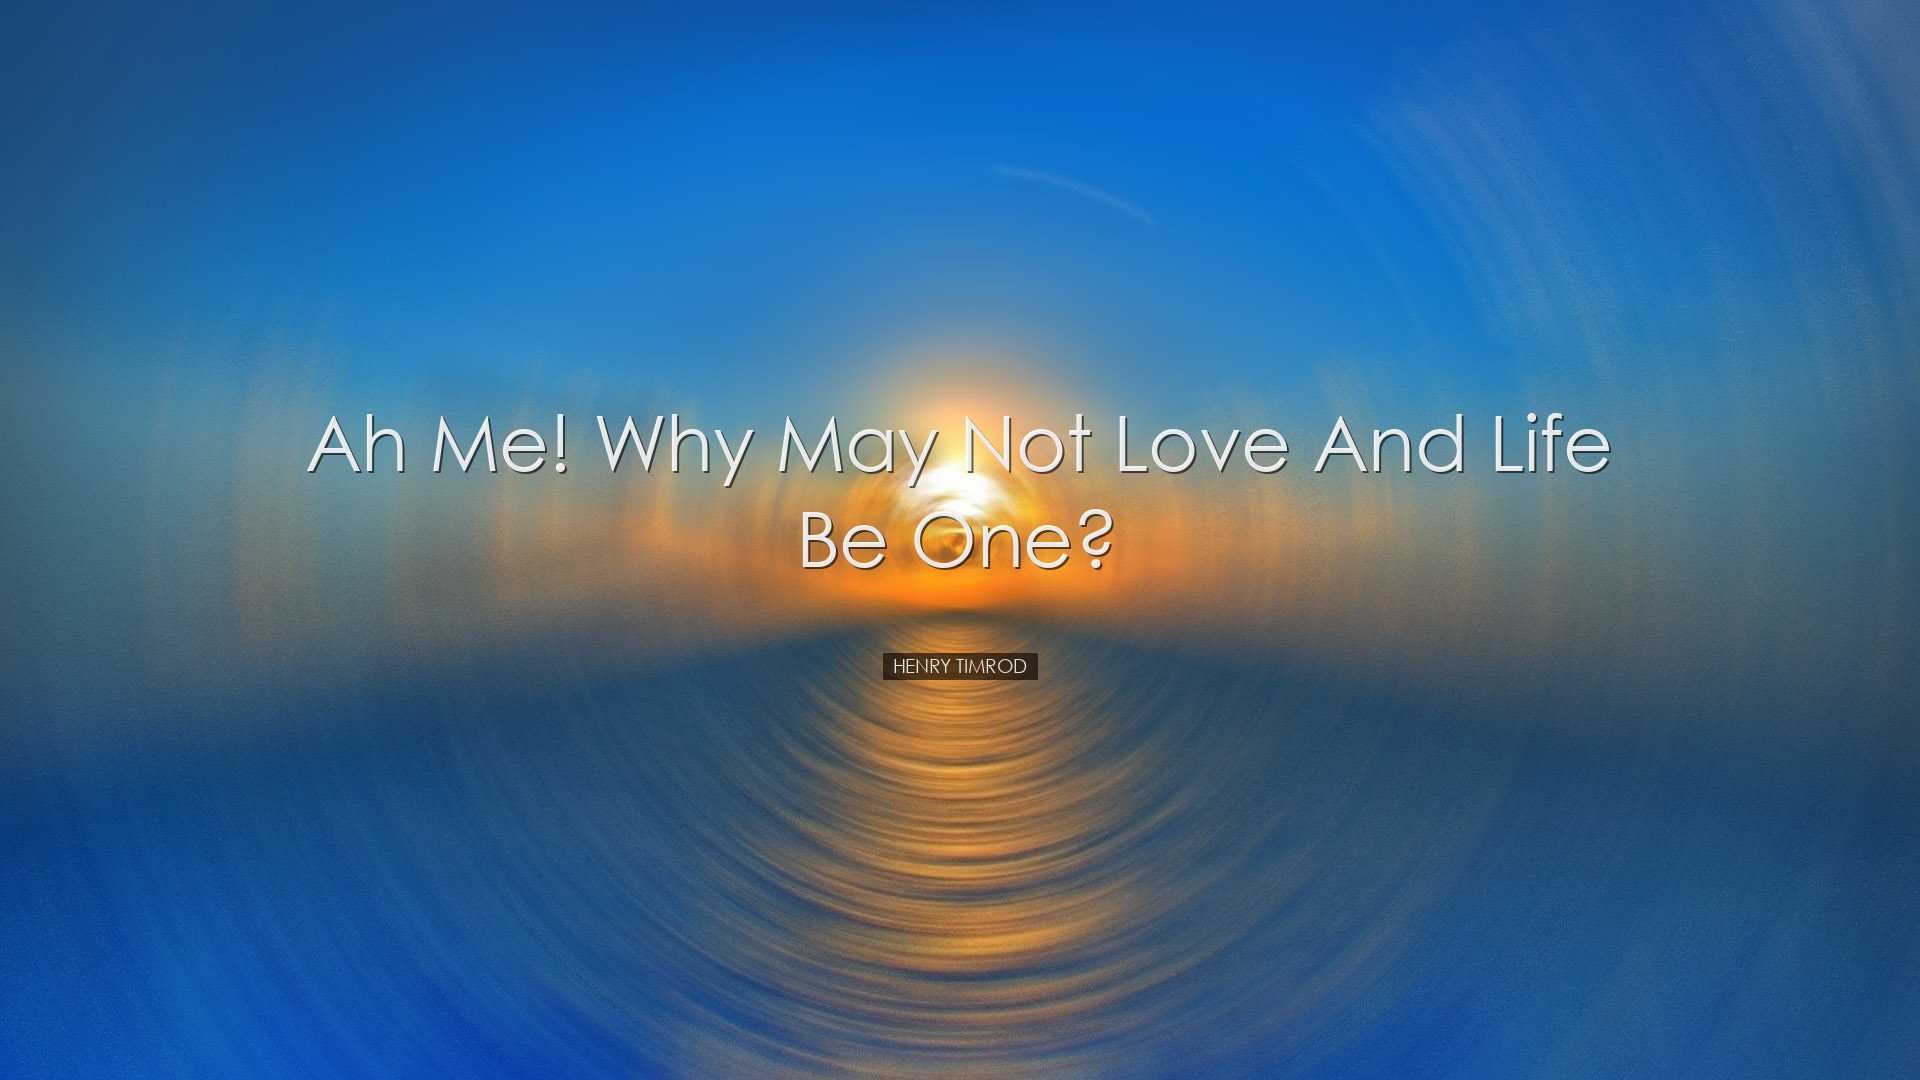 Ah me! why may not love and life be one? - Henry Timrod